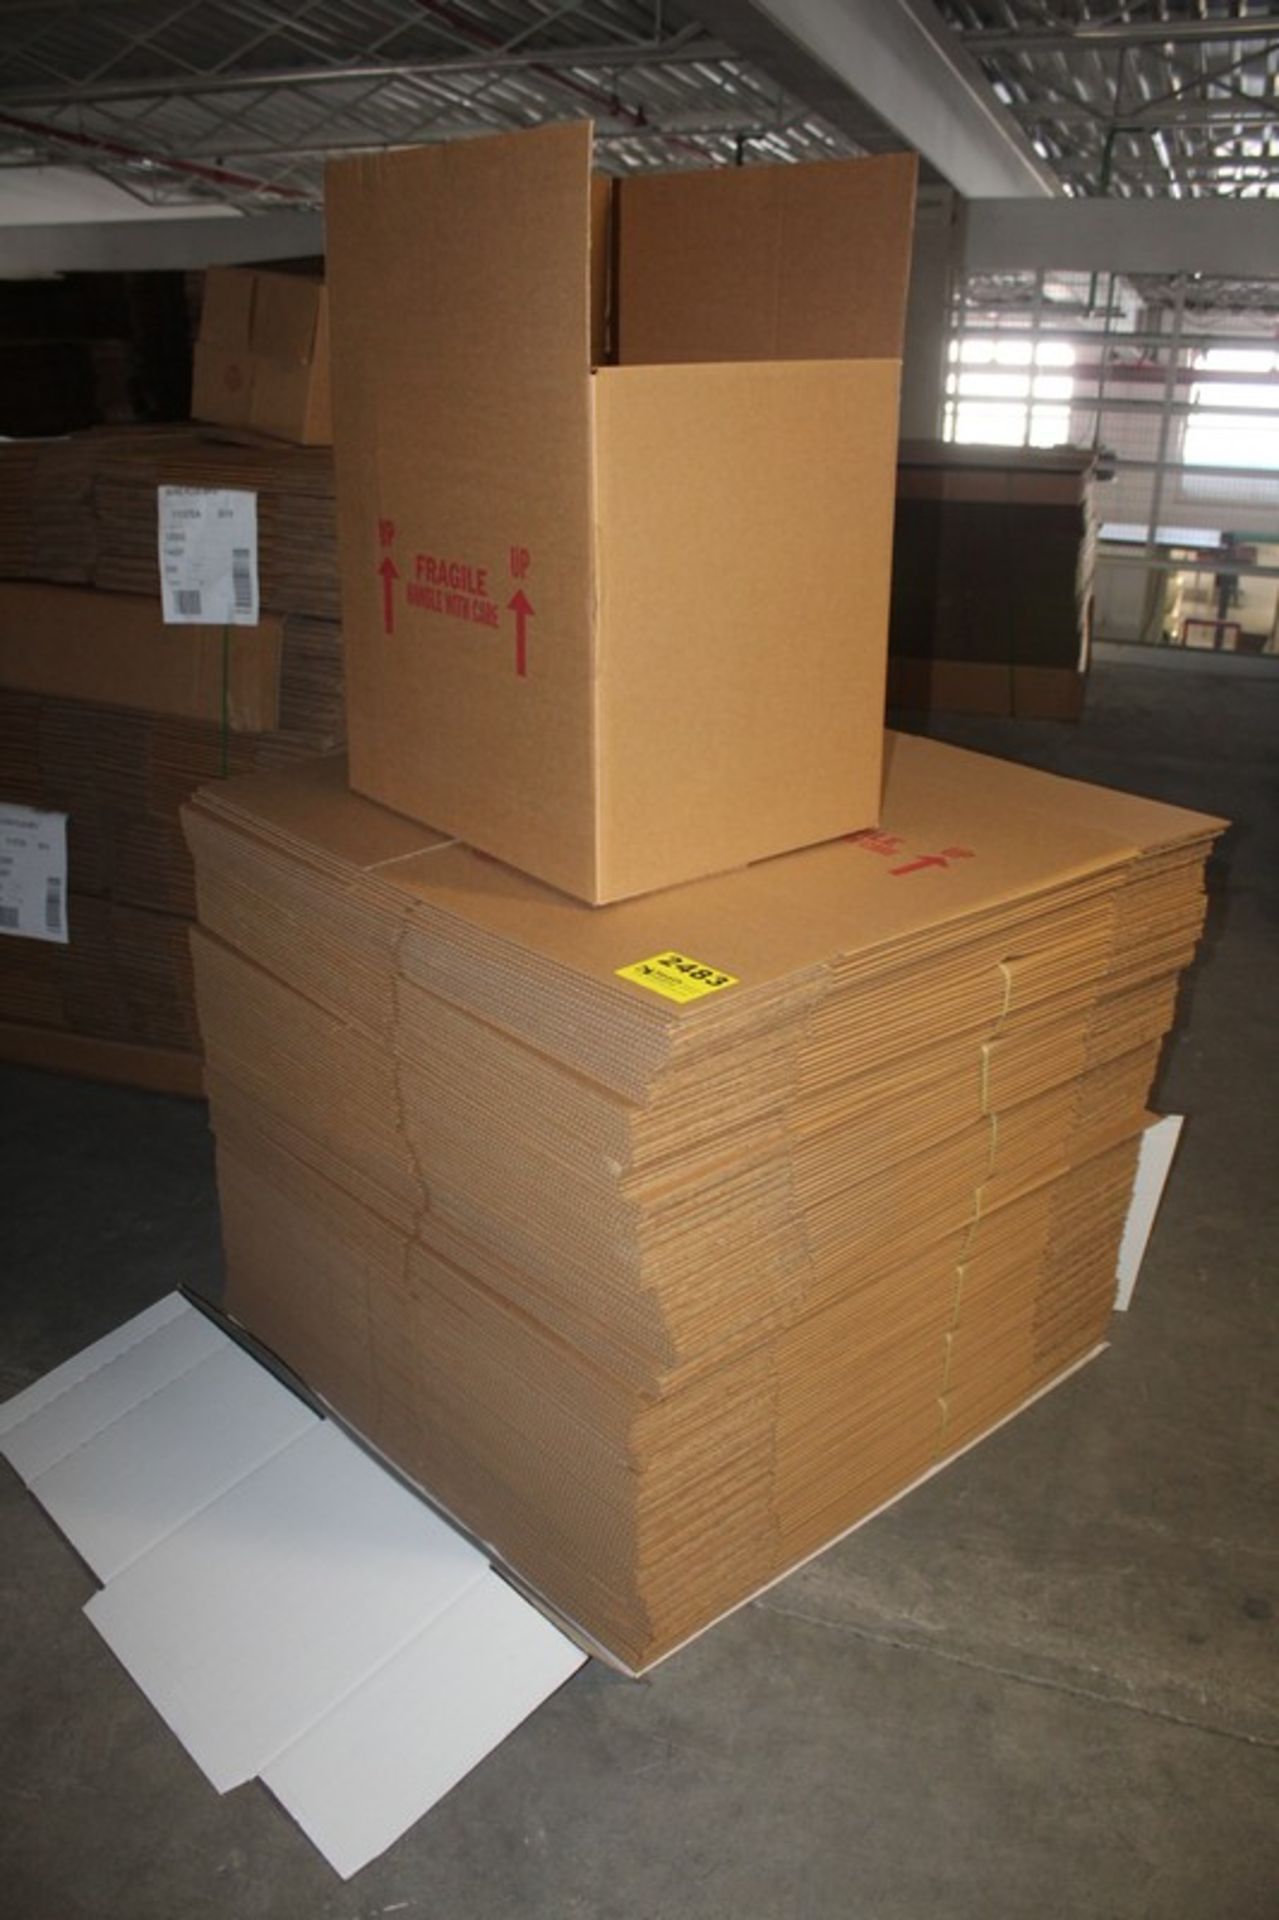 STACK OF 22" X 18" X 22" CARDBOARD BOXES